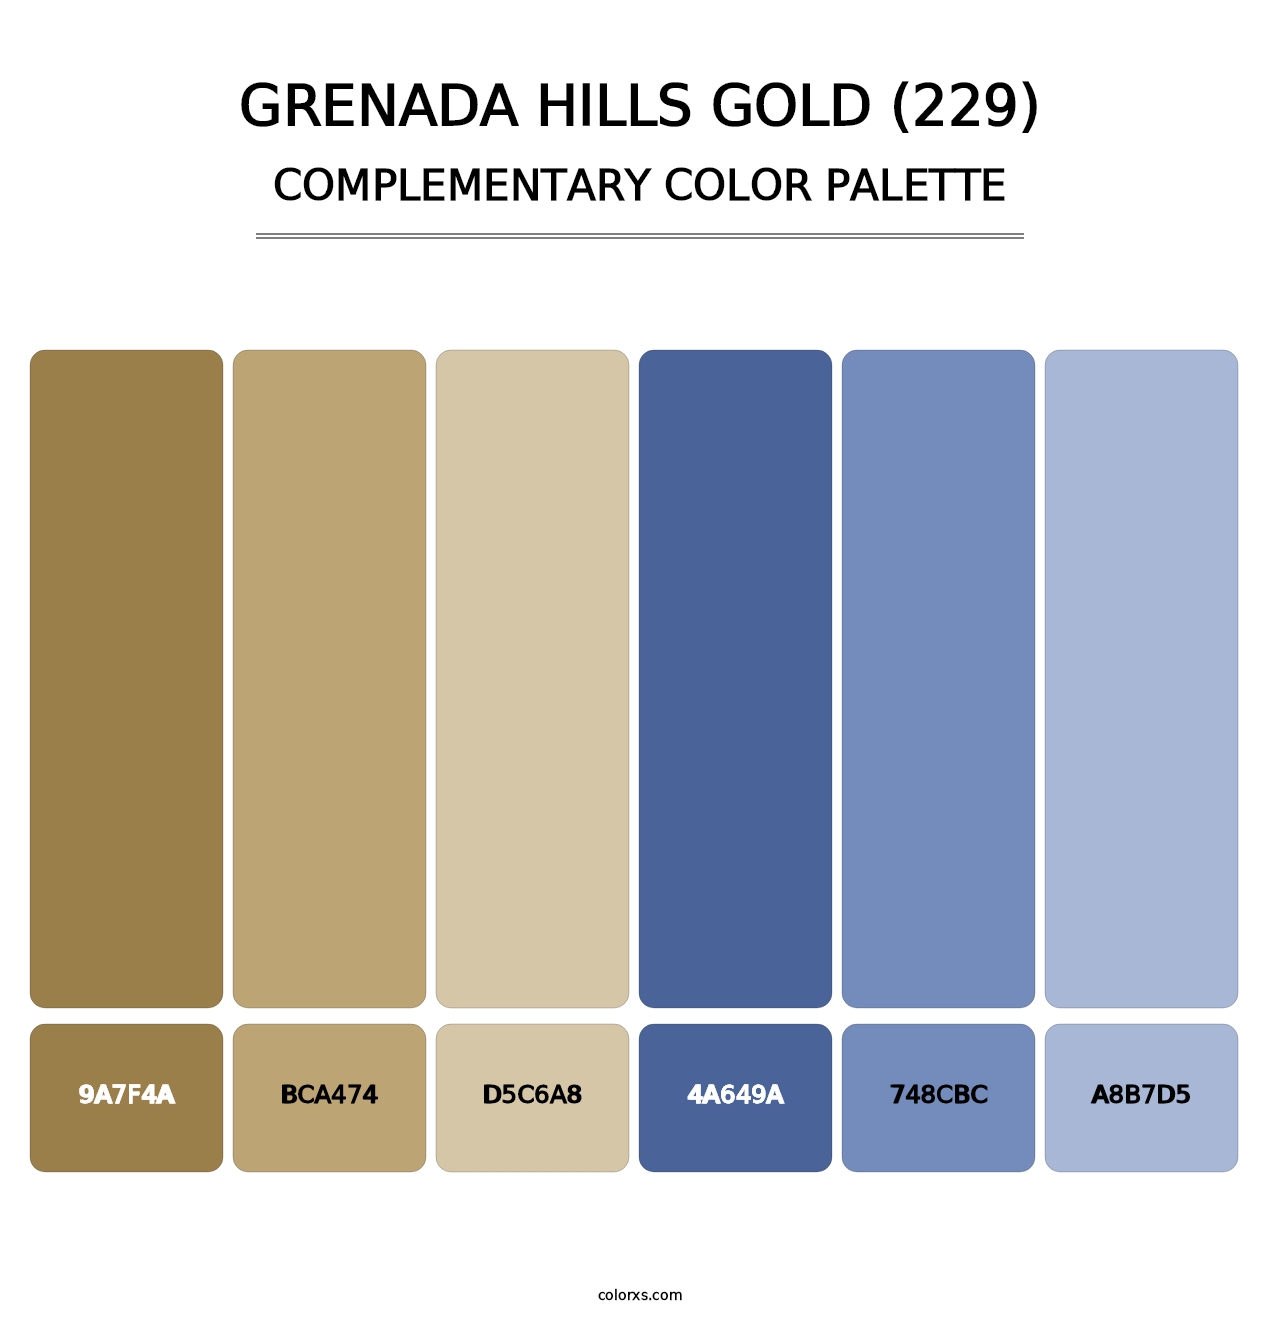 Grenada Hills Gold (229) - Complementary Color Palette